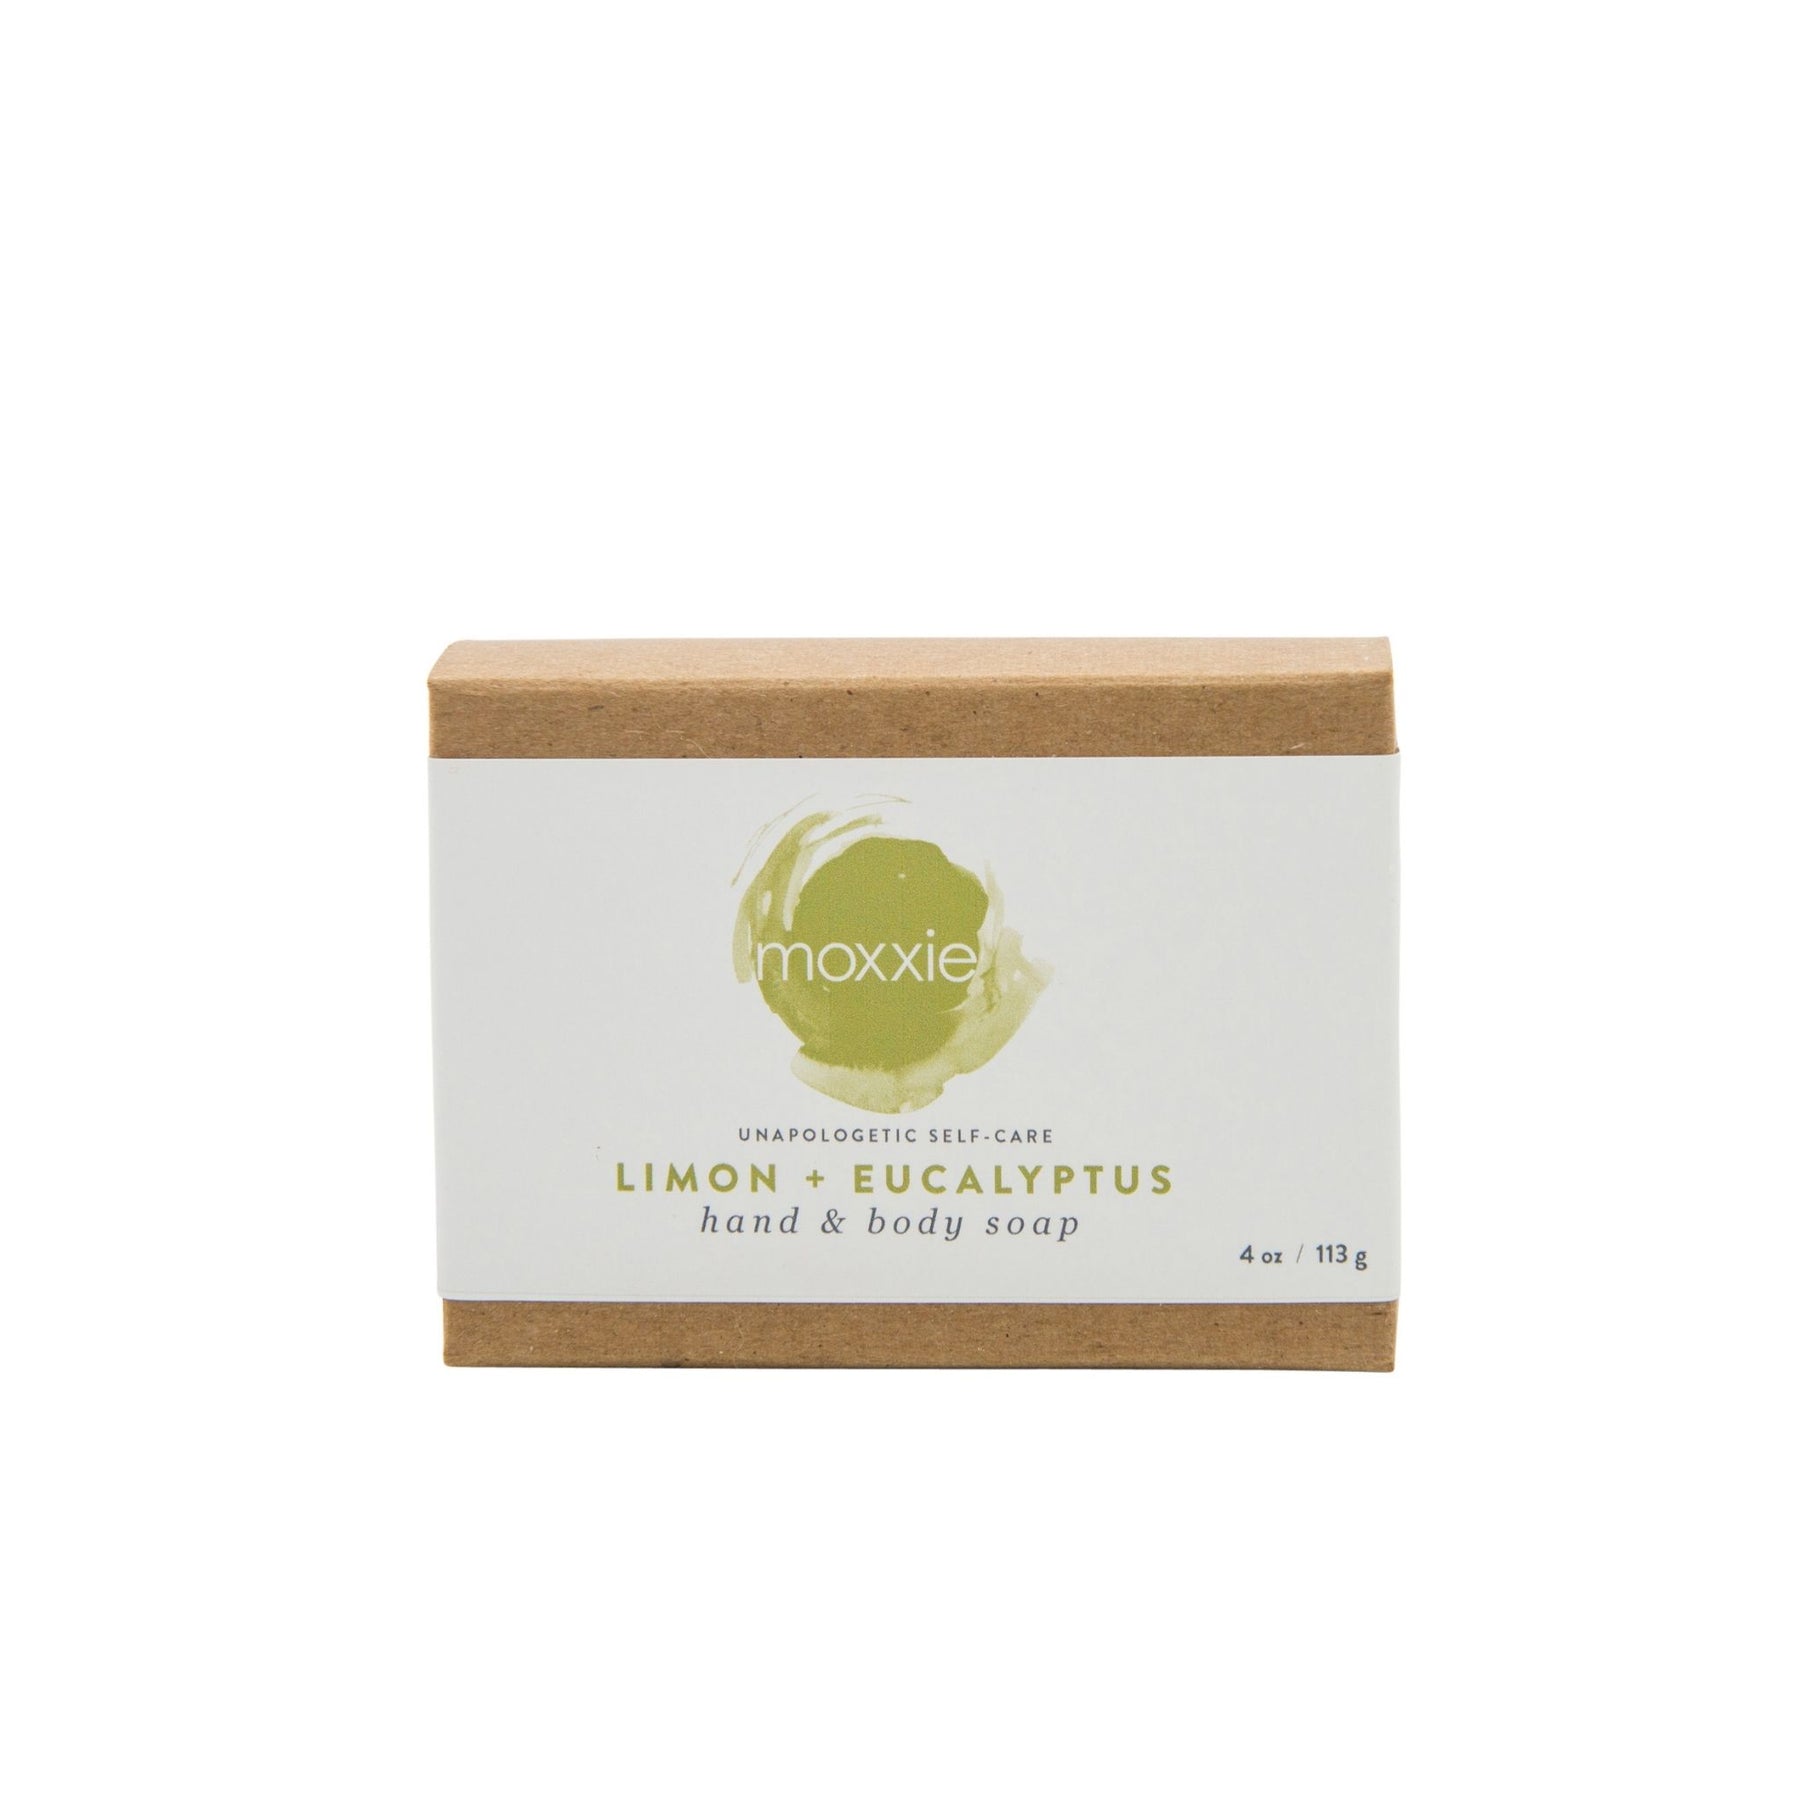 Moxxie all natural, handcrafted Bar Soap - Limon and Eucalyptus